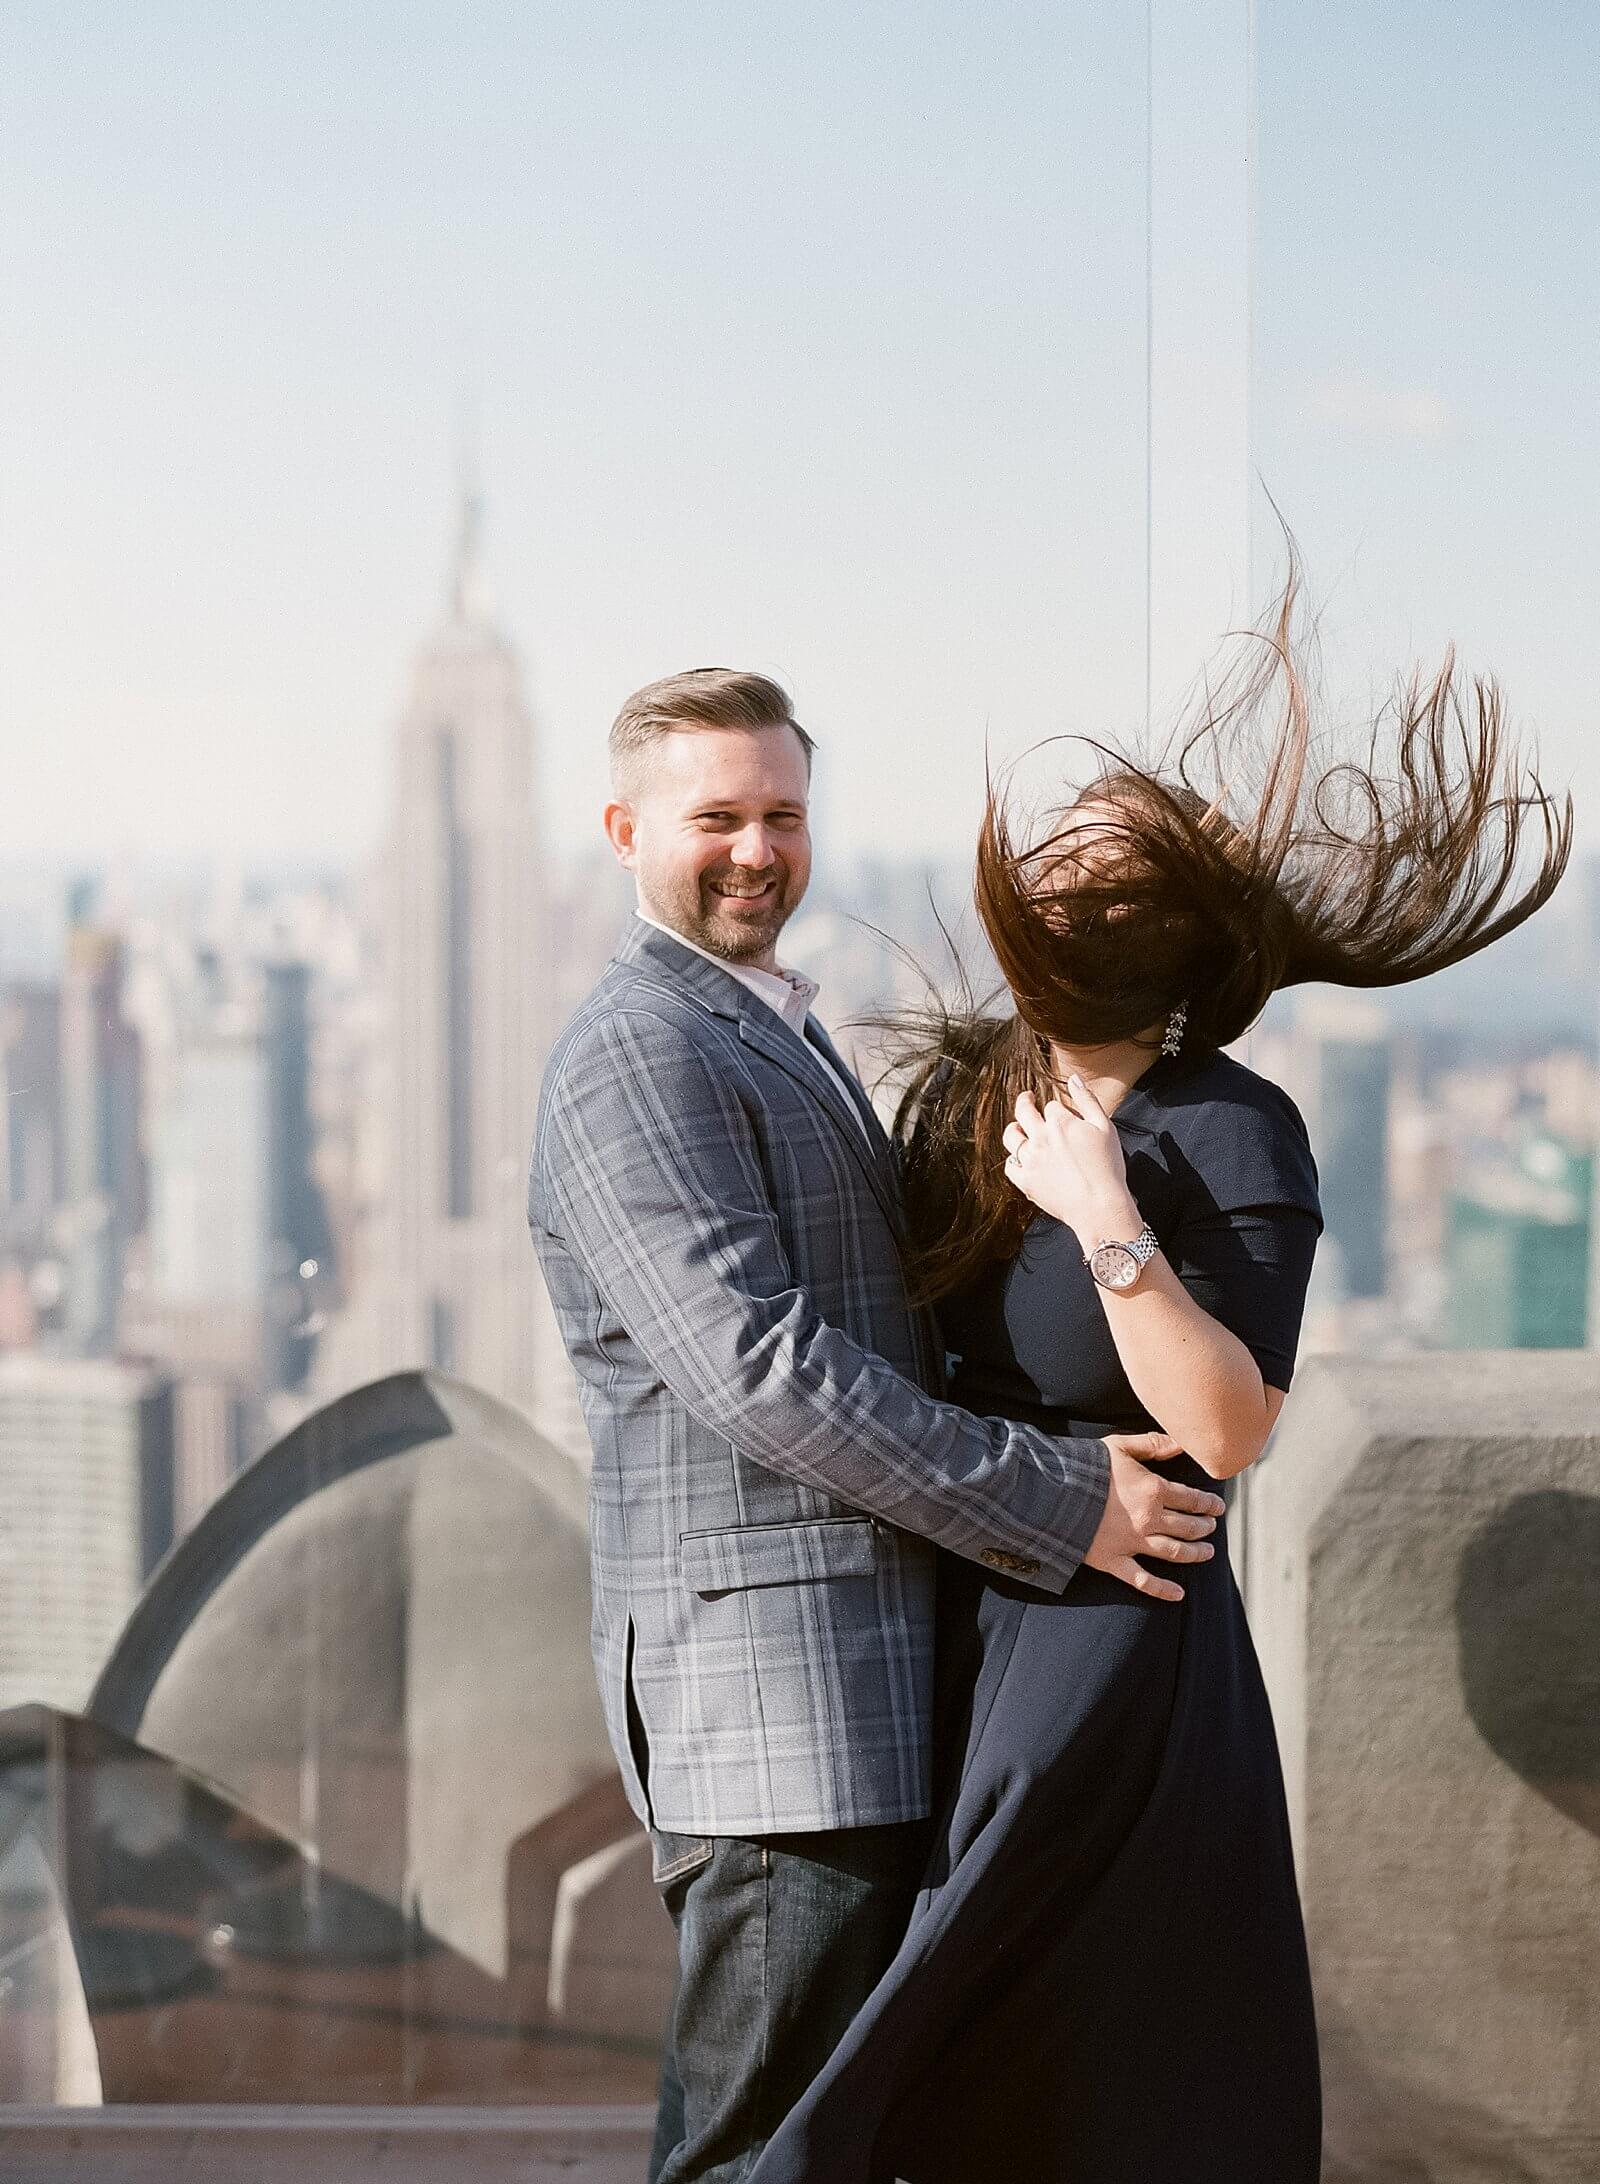 A couple during their engagement session at The Top of The Rock.